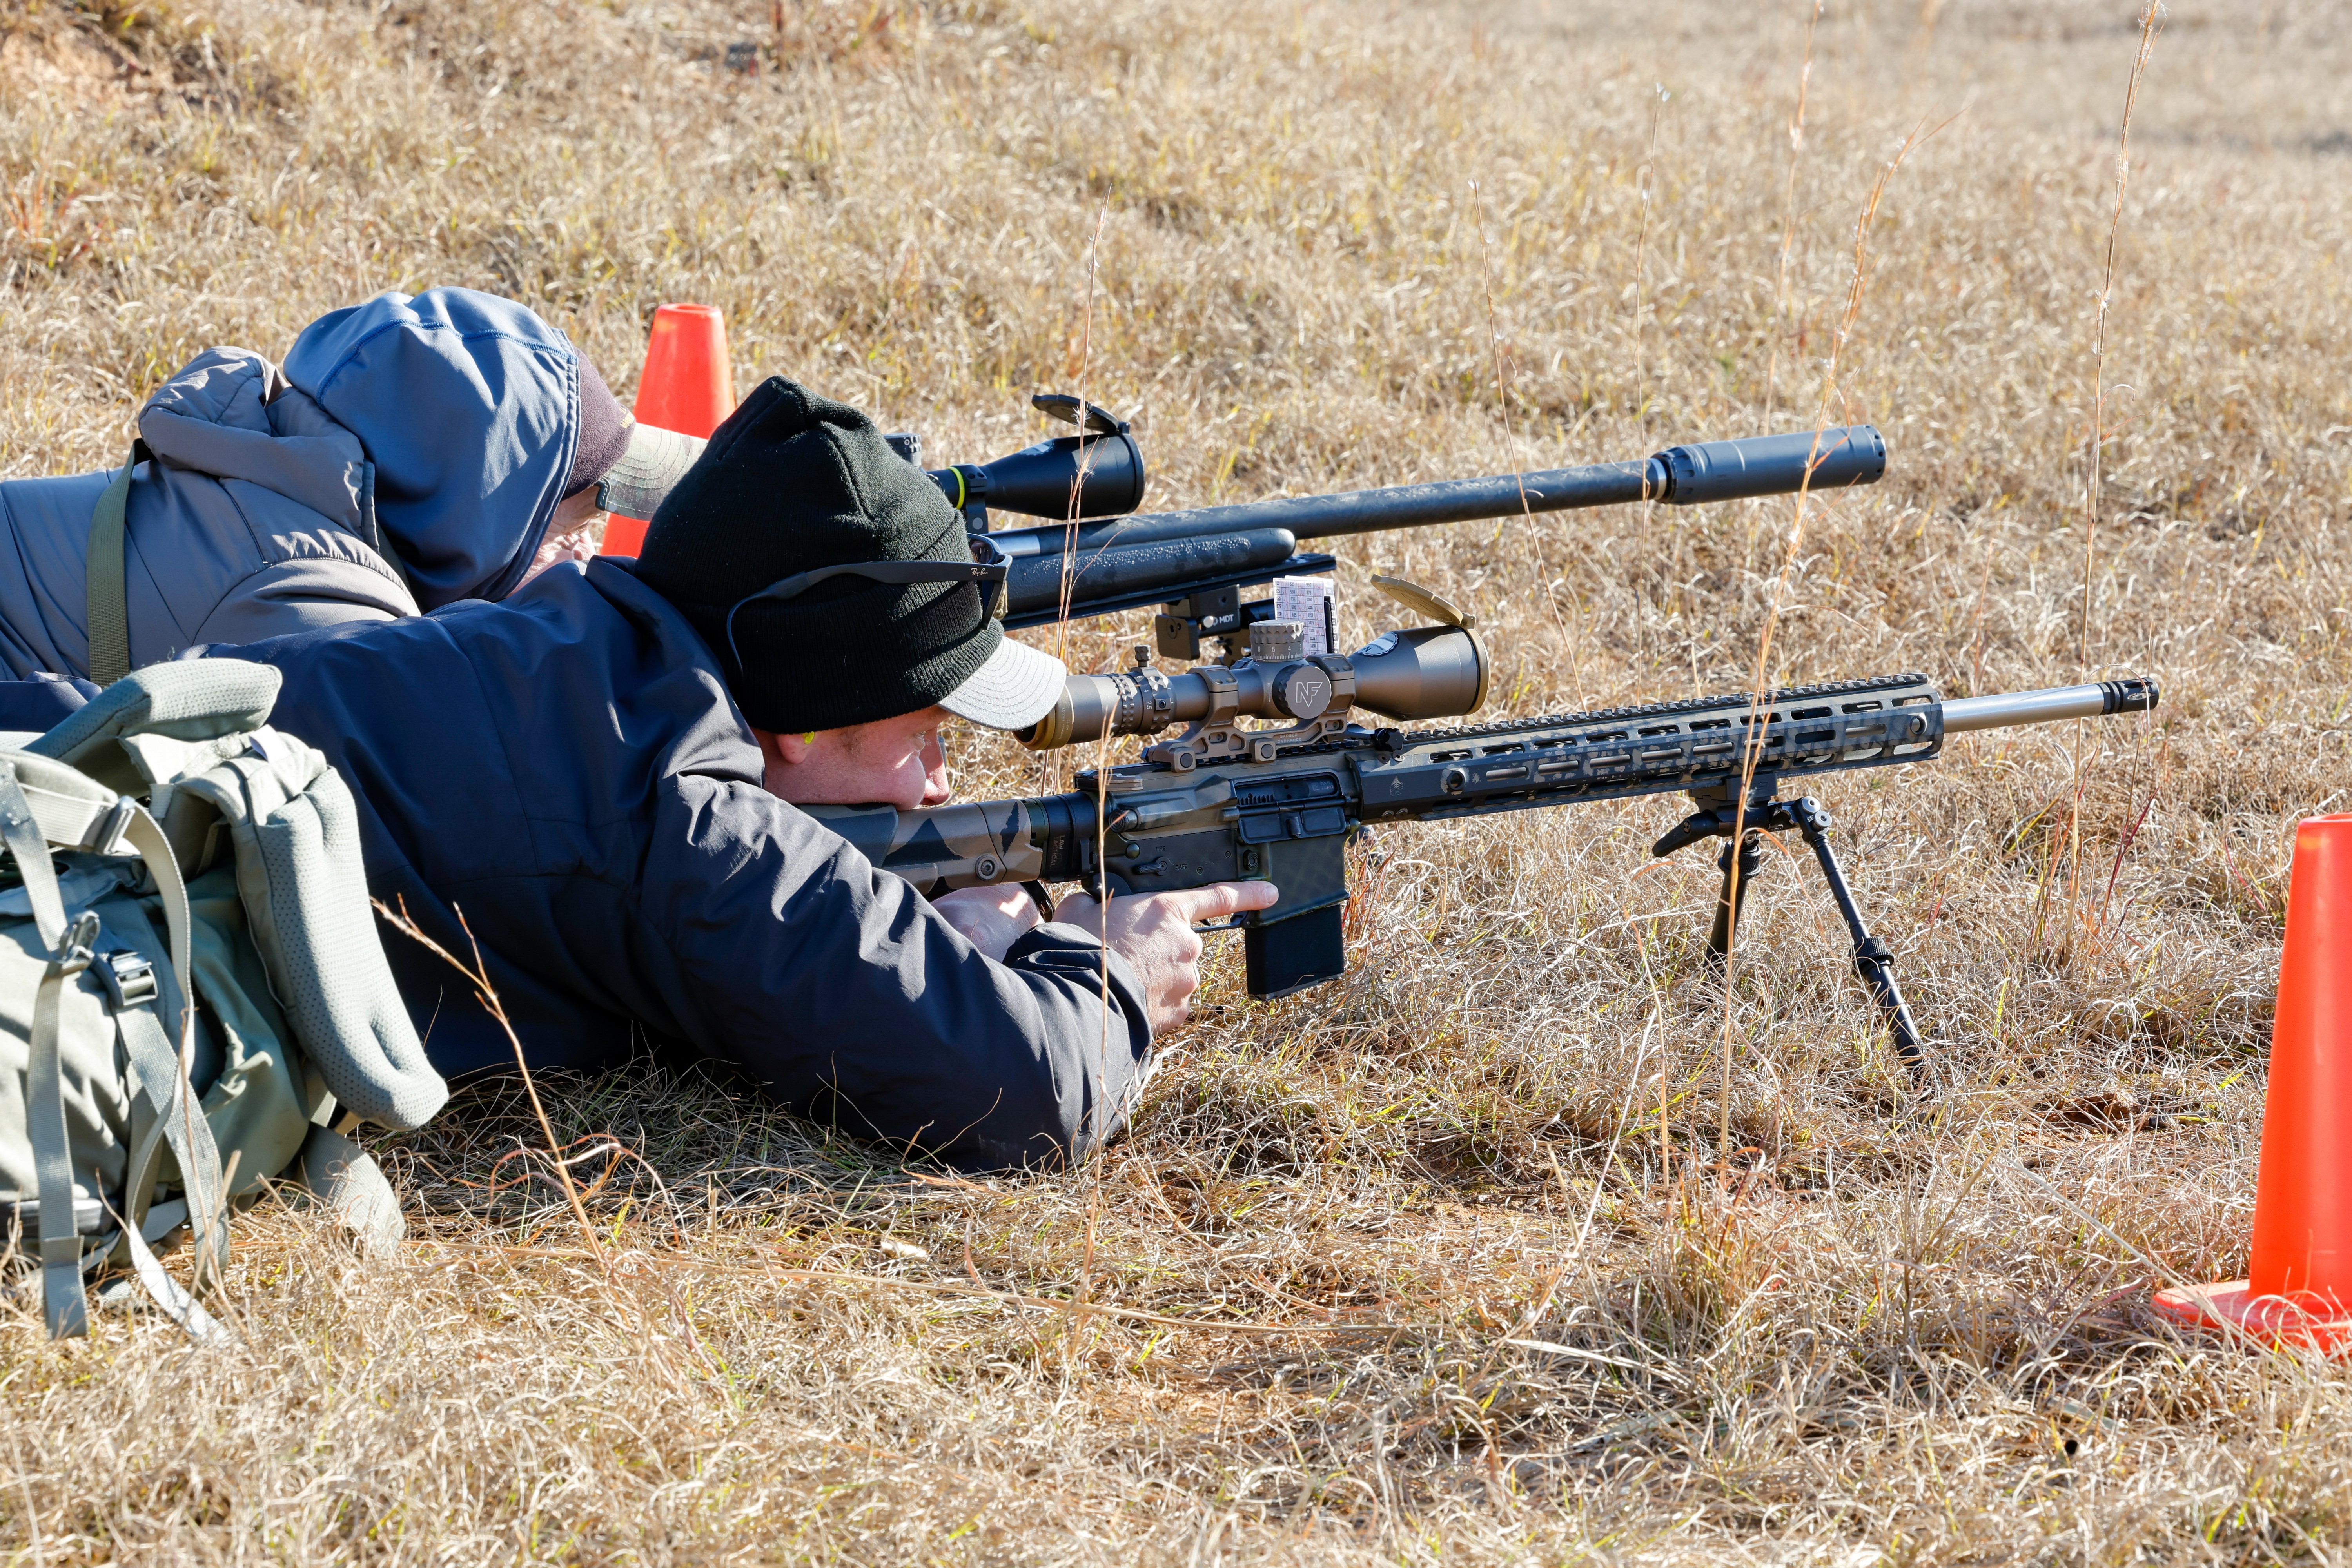 U.S. Army Marksmanship Unit competes at The Mammoth Sniper